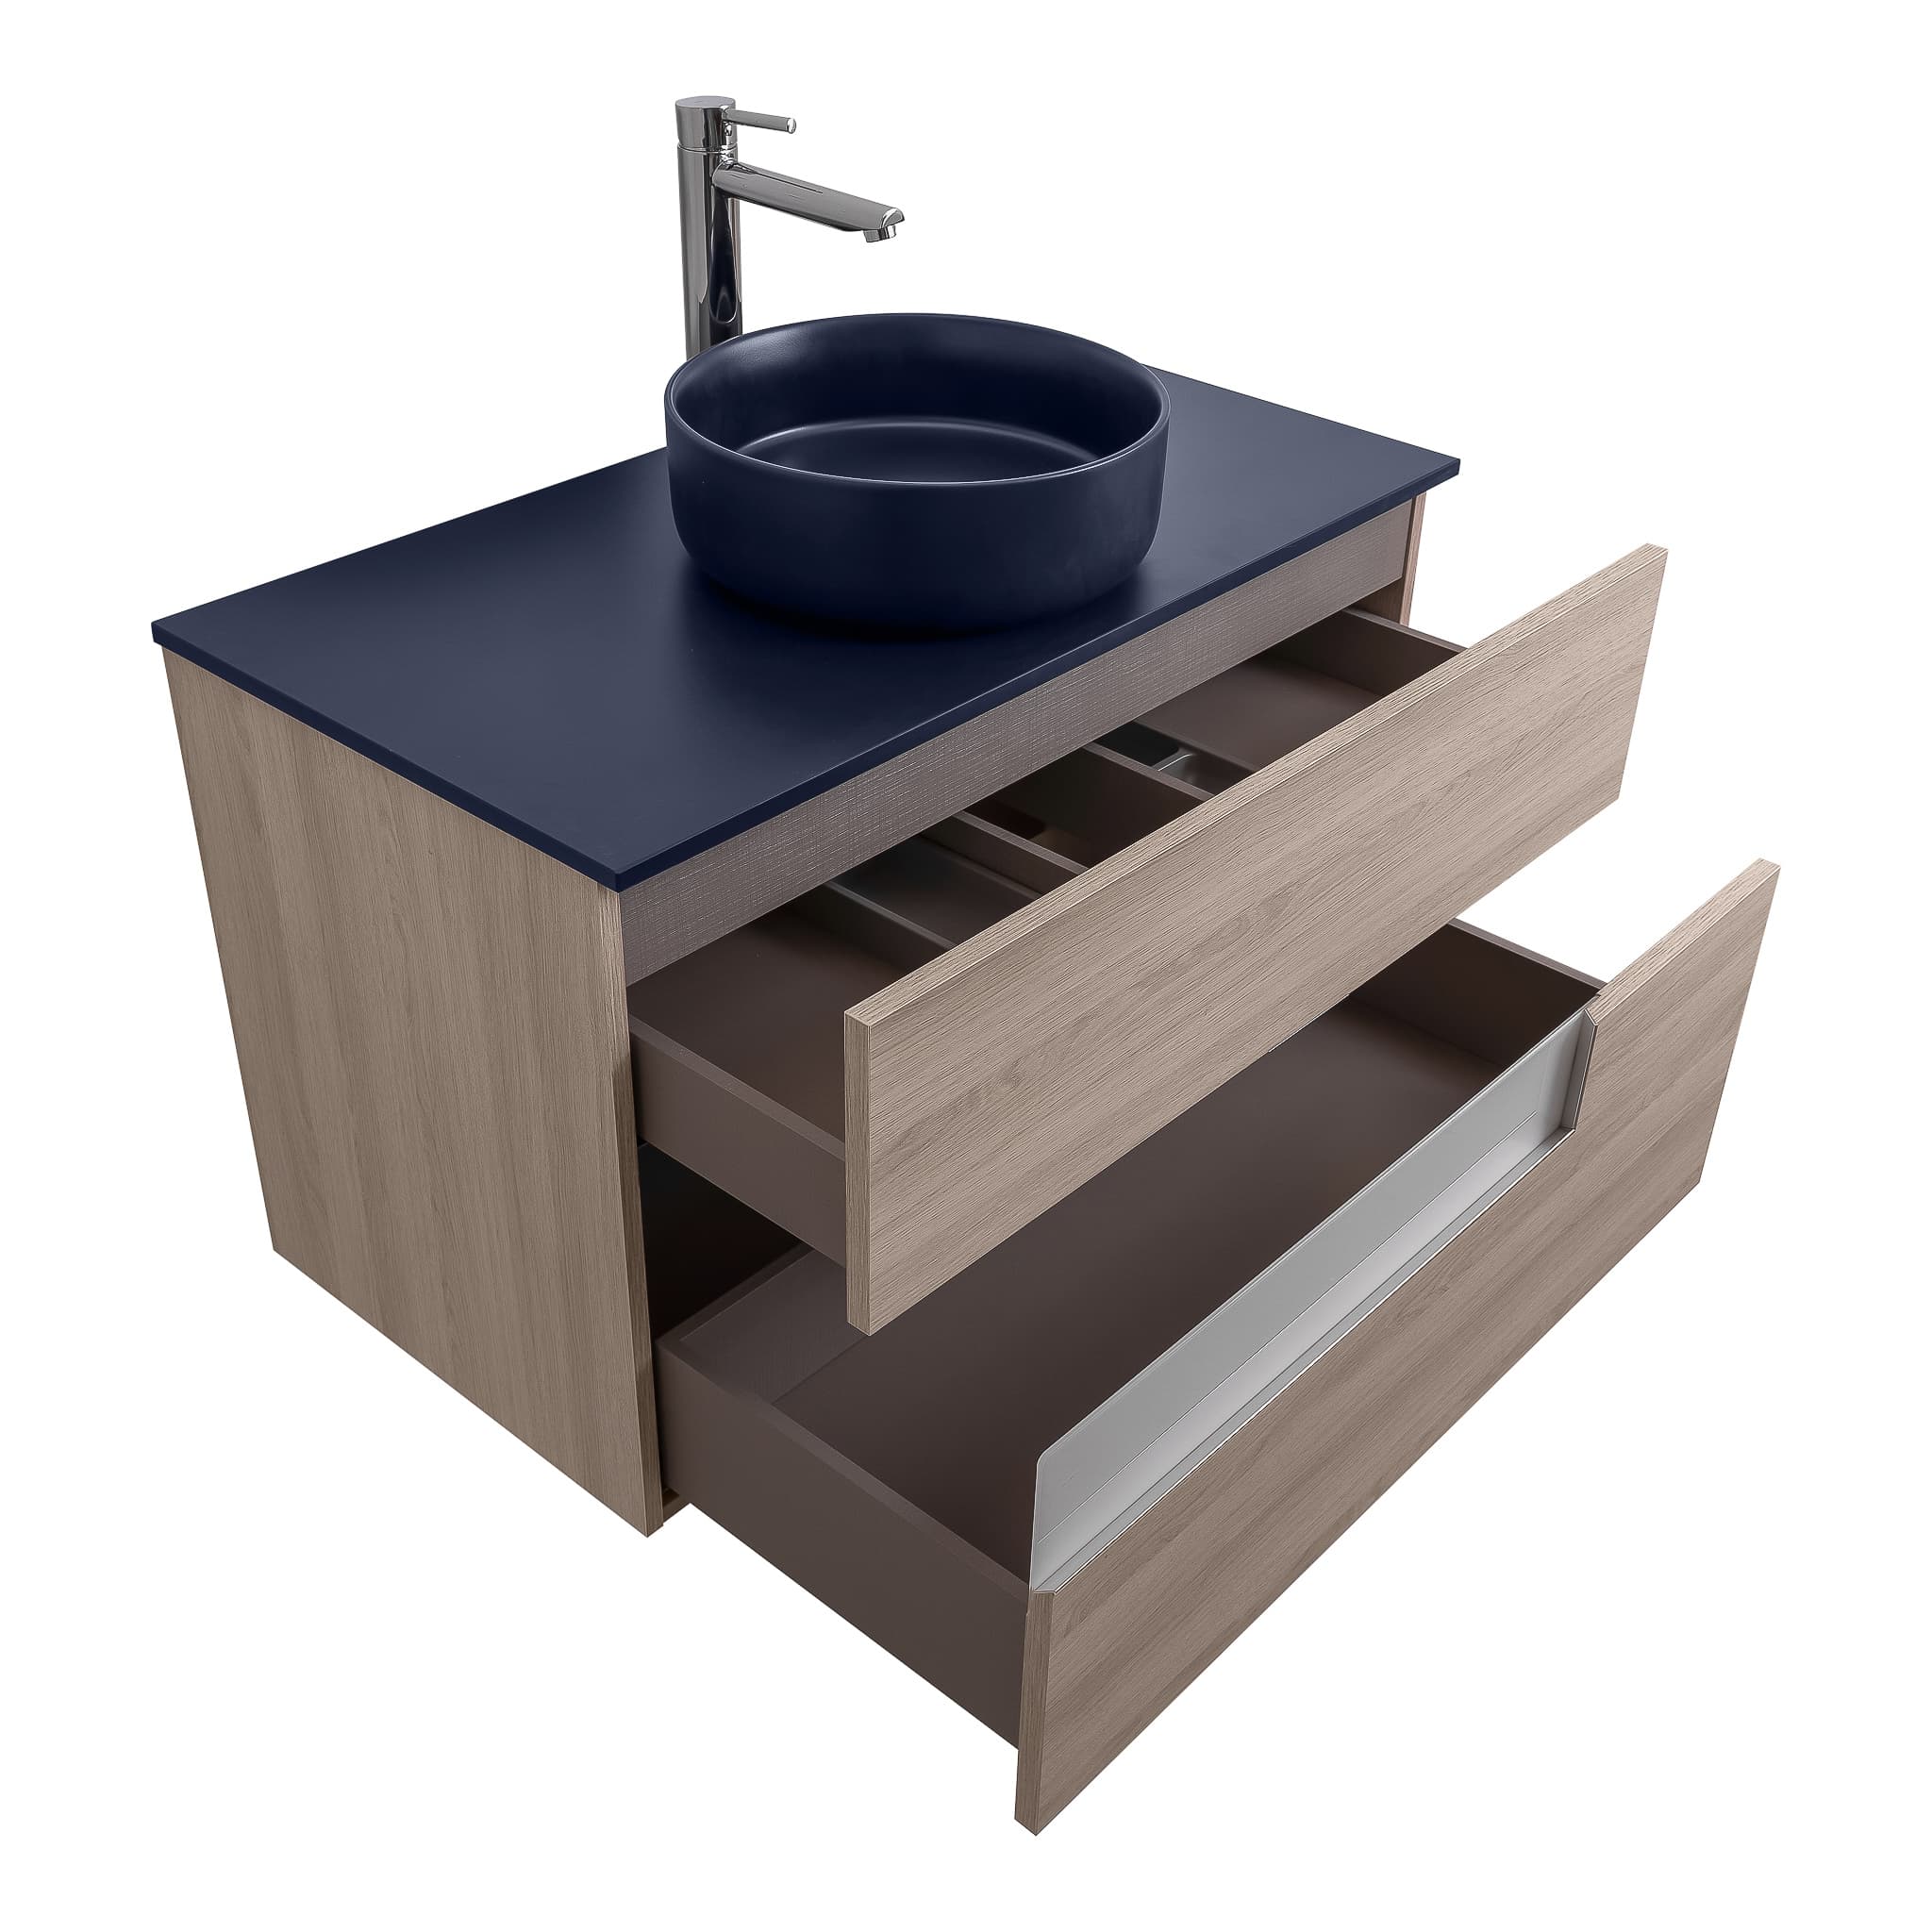 Vision 31.5 Natural Light Wood Cabinet, Ares Navy Blue Top And Ares Navy Blue Ceramic Basin, Wall Mounted Modern Vanity Set